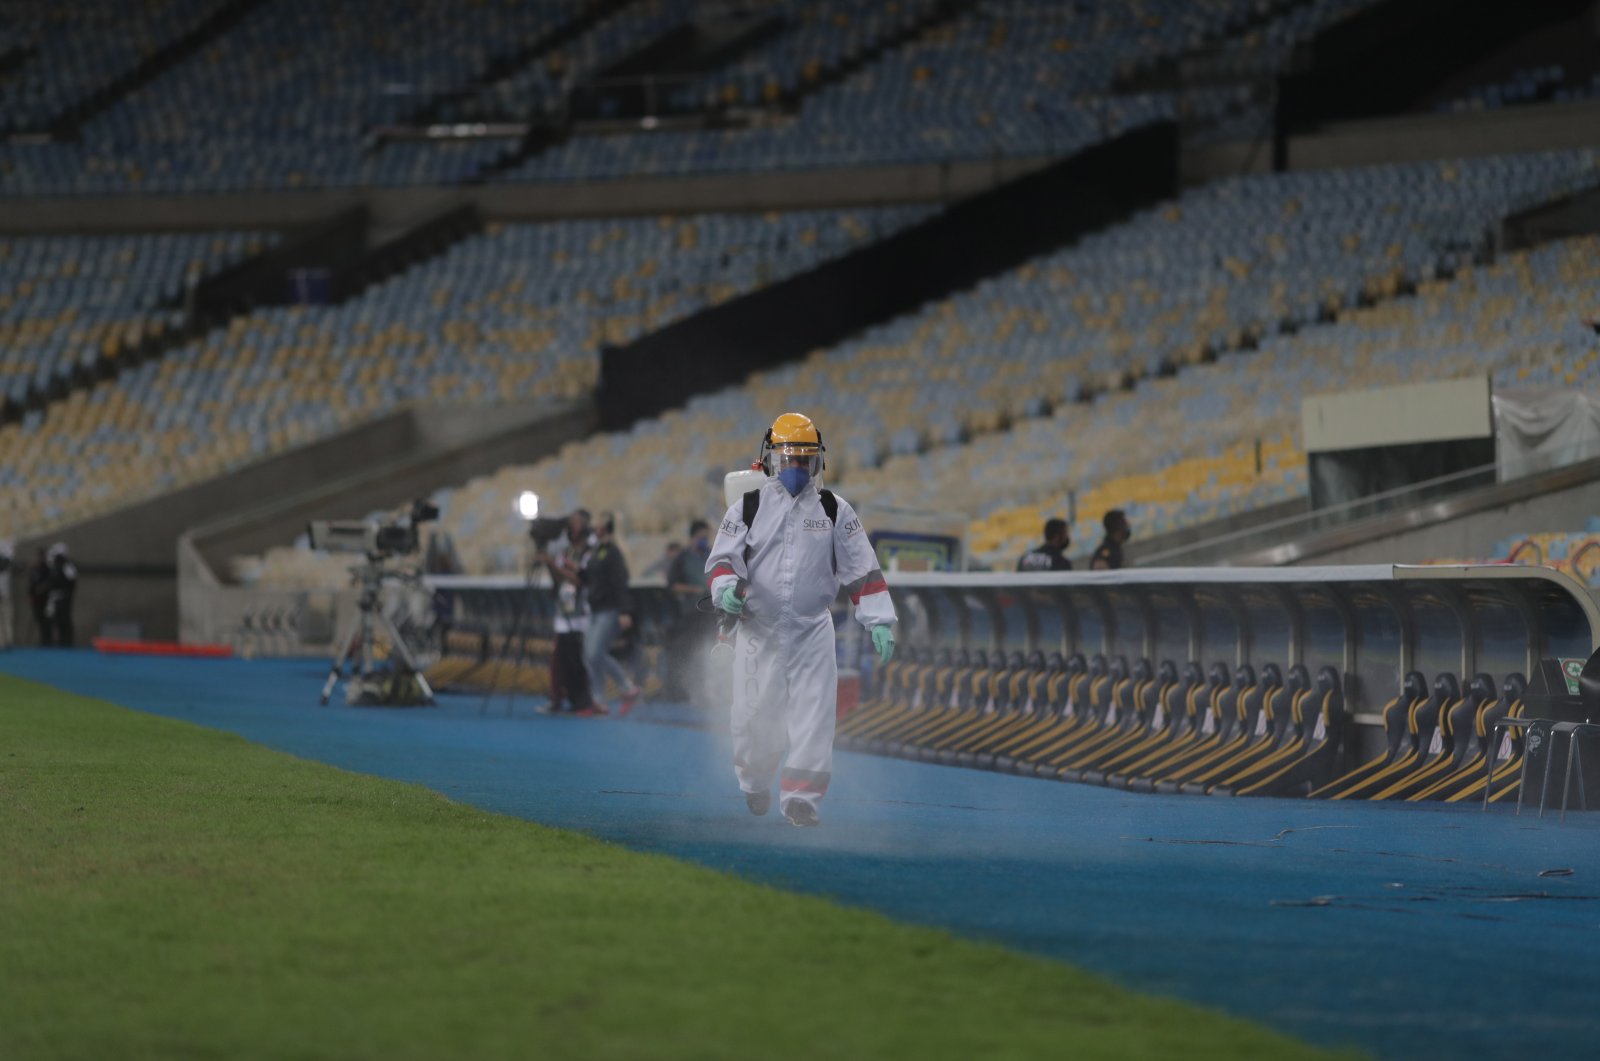 A man in a protective suit sprays disinfectant as a means of preventing the spread of the coronavirus during the Carioca Championship second leg final match between Flamengo and Fluminenes at Maracana stadium in Rio de Janeiro, Brazil, July 15, 2020. (EPA Photo)